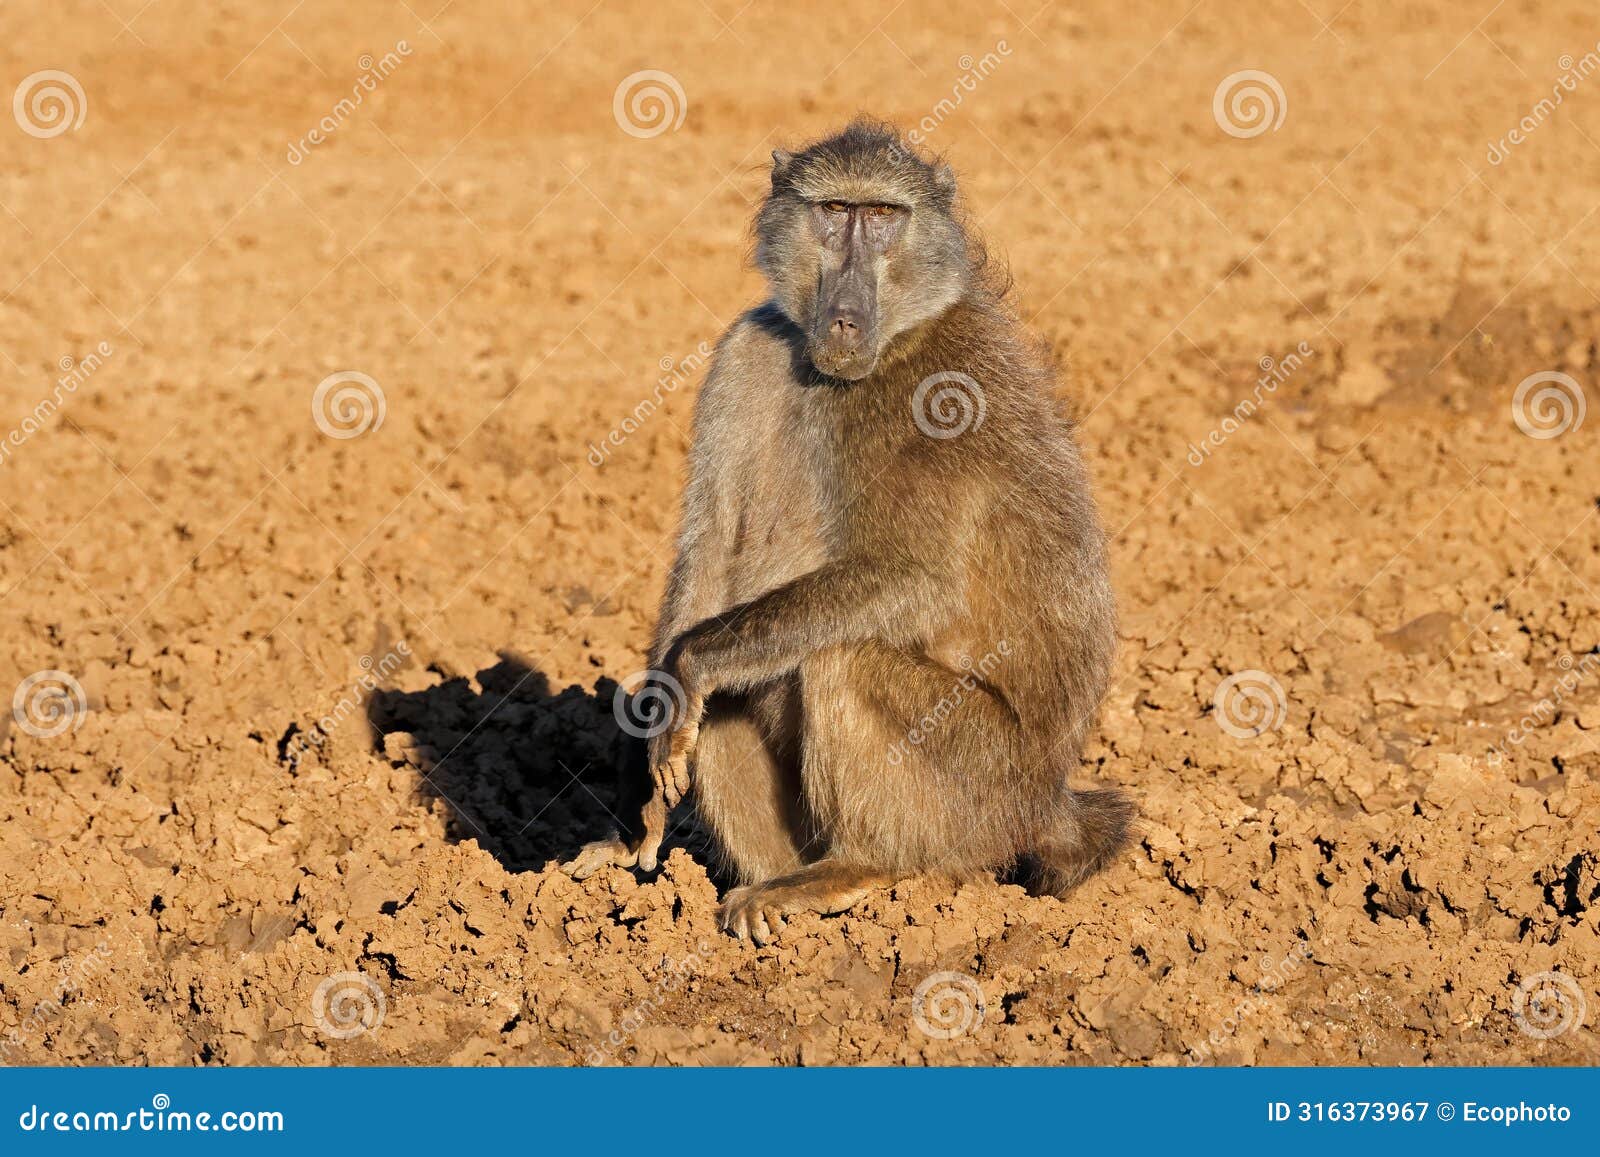 a male chacma baboon in natural habitat, mokala national park, south africa